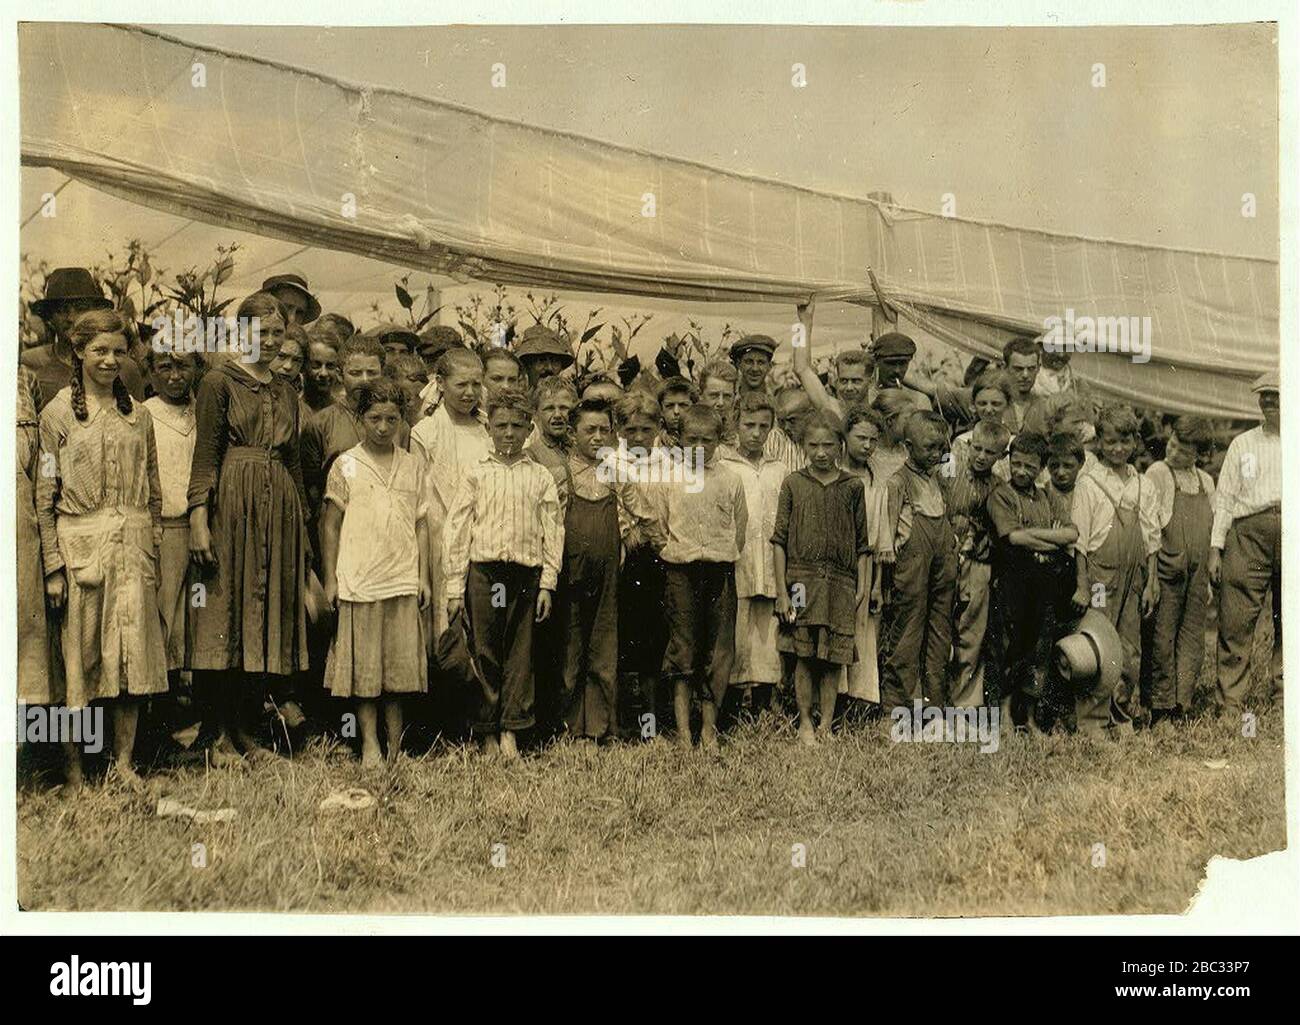 Group of tobacco pickers in Bermant plantation, 3 were 10 yrs., 3 were 11 yrs., 13 were 12, 12 were 13 yrs., 2 - 14 yrs. old. The owner said, 'They all get $1.25 a day.' Stock Photo